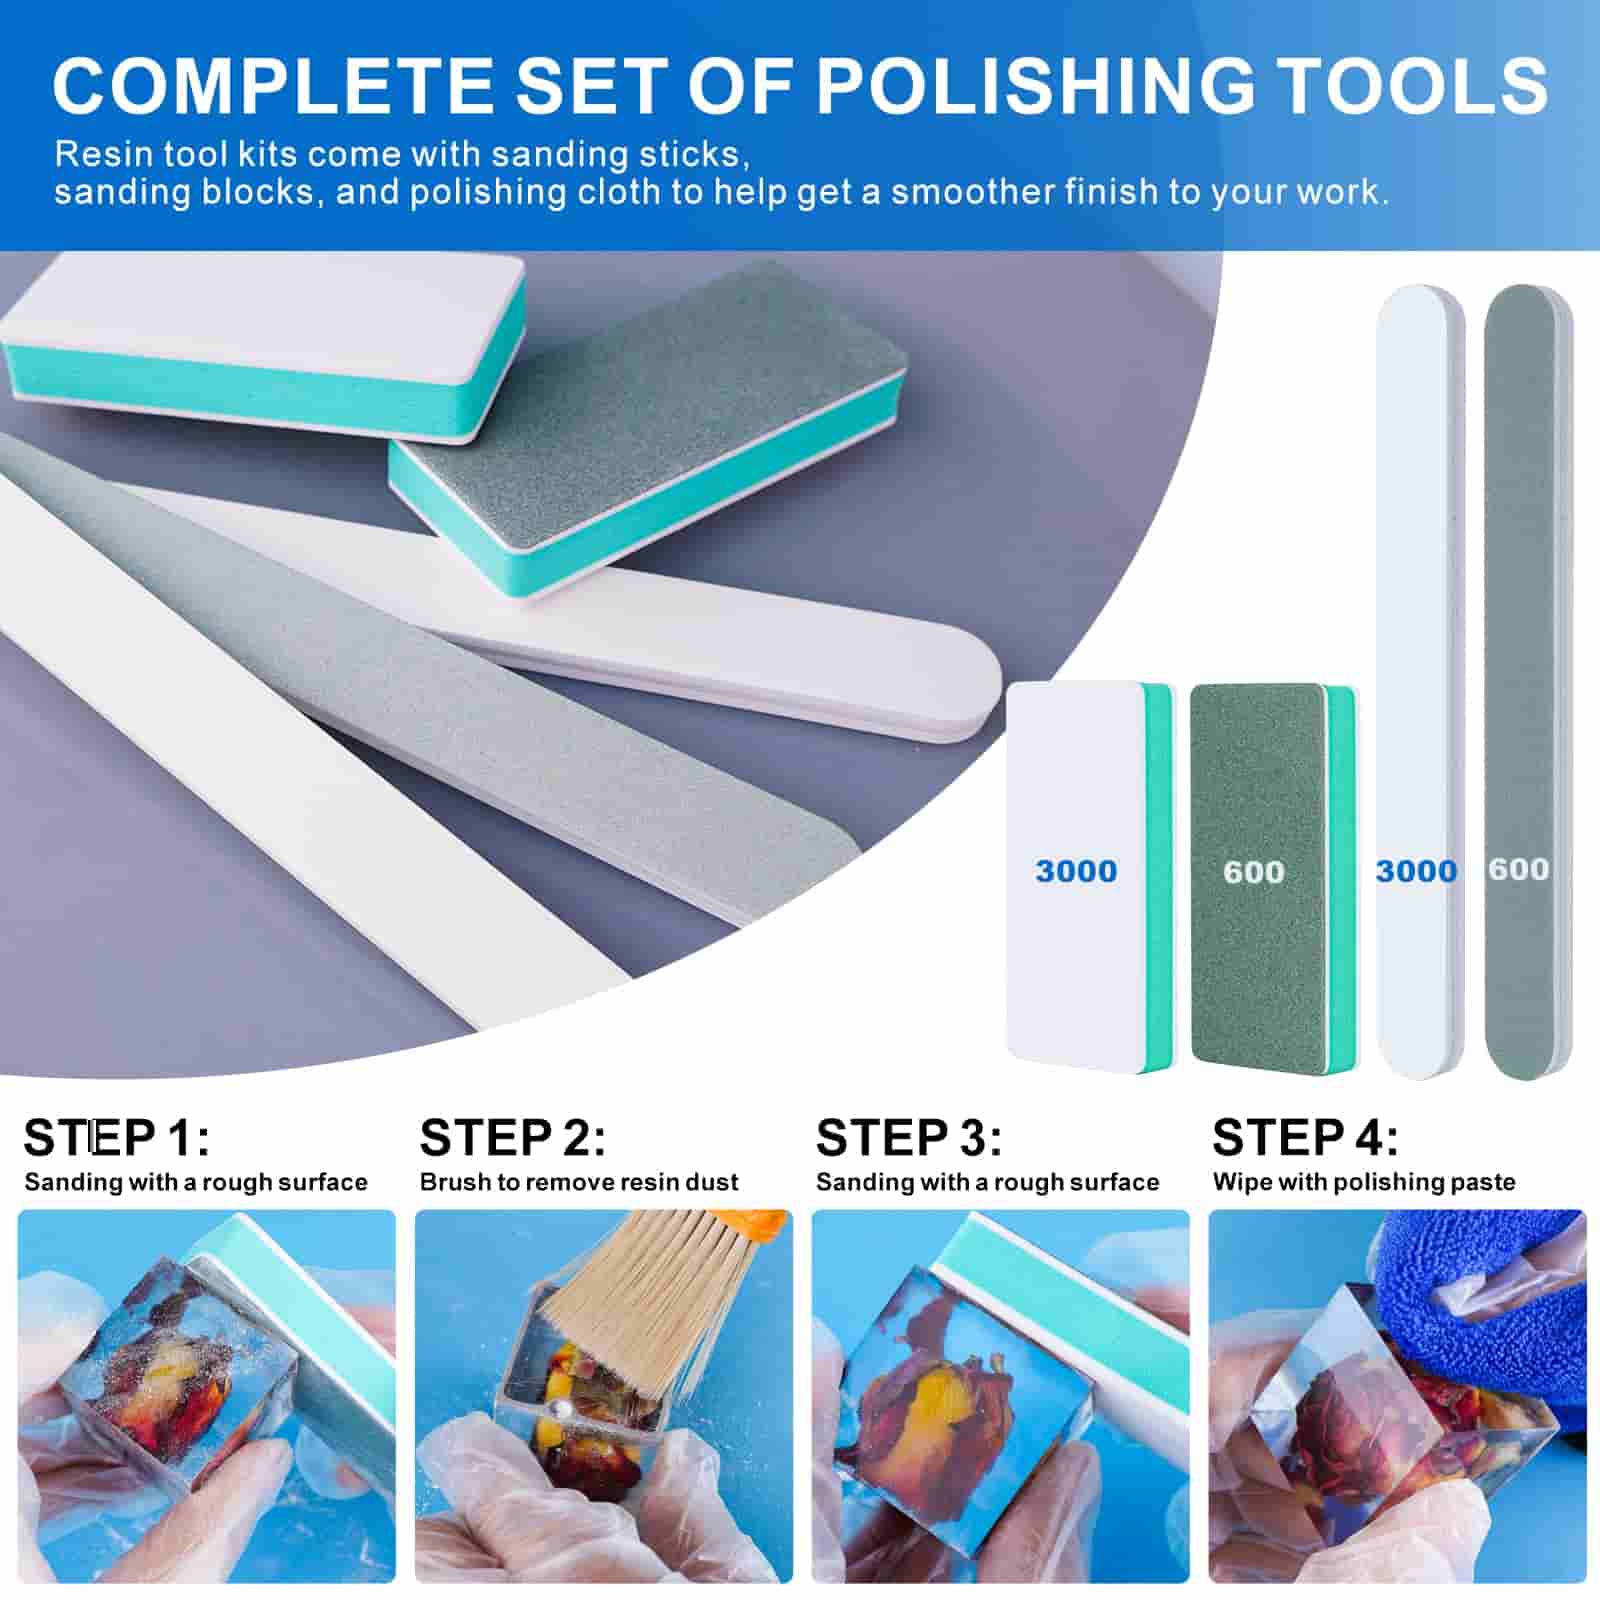 Resin Sanding and Polishing Kit,23 Pieces YASPIT Resin Casting Tools Set, Include Sand Papers,Resin File,Polishing Blocks,Scissors,Wooden Brush for